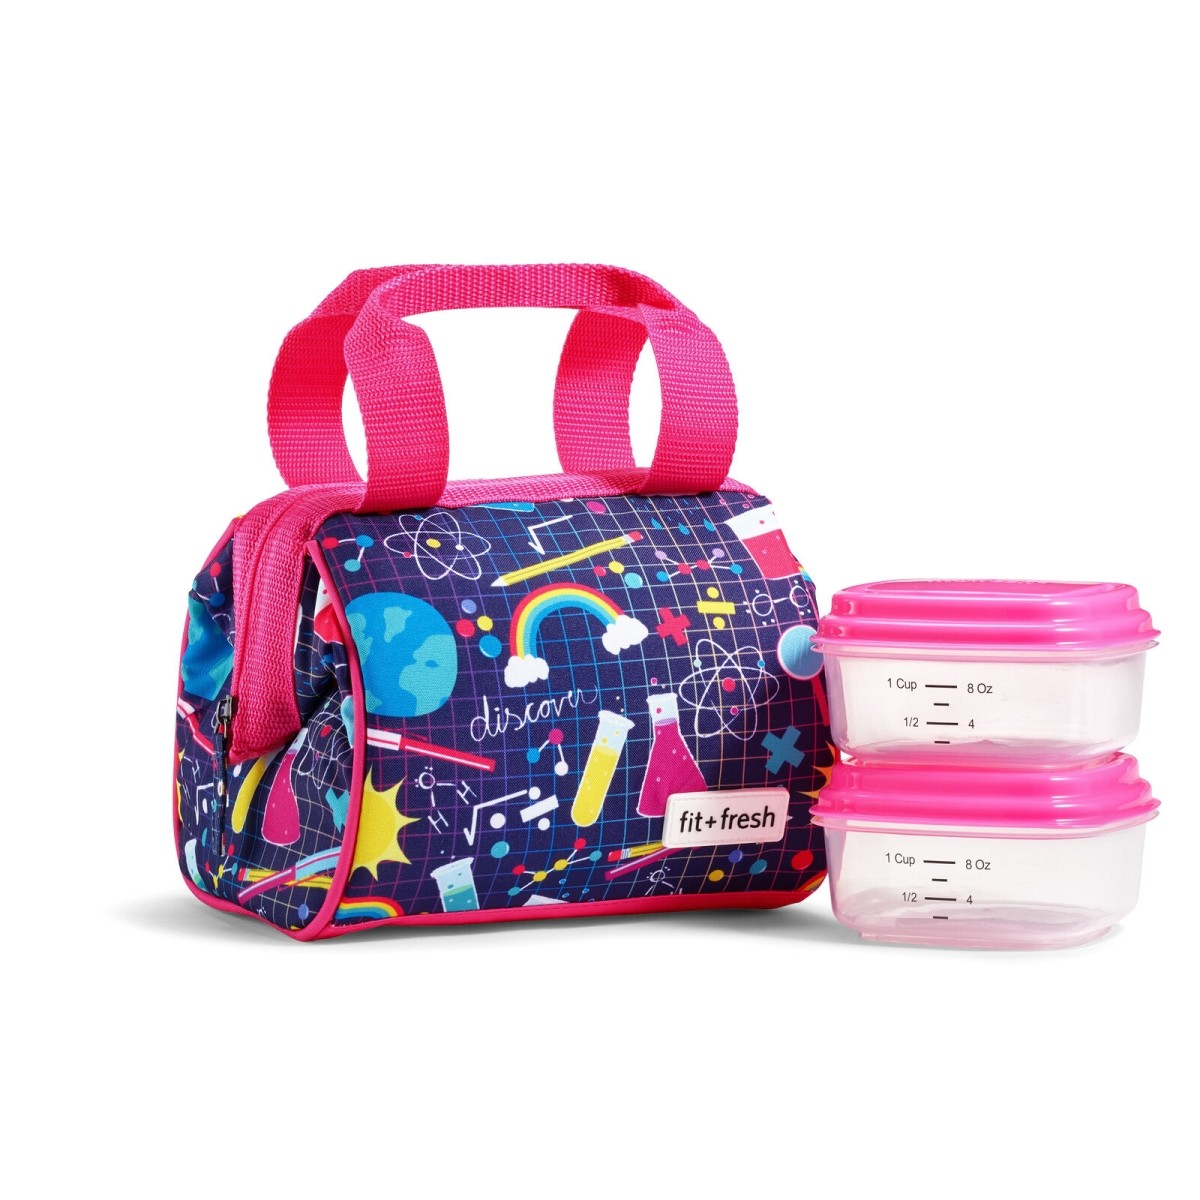 FIT & FRESH 397KFF2644 STAY CURIOUS RILEY KIT BAG